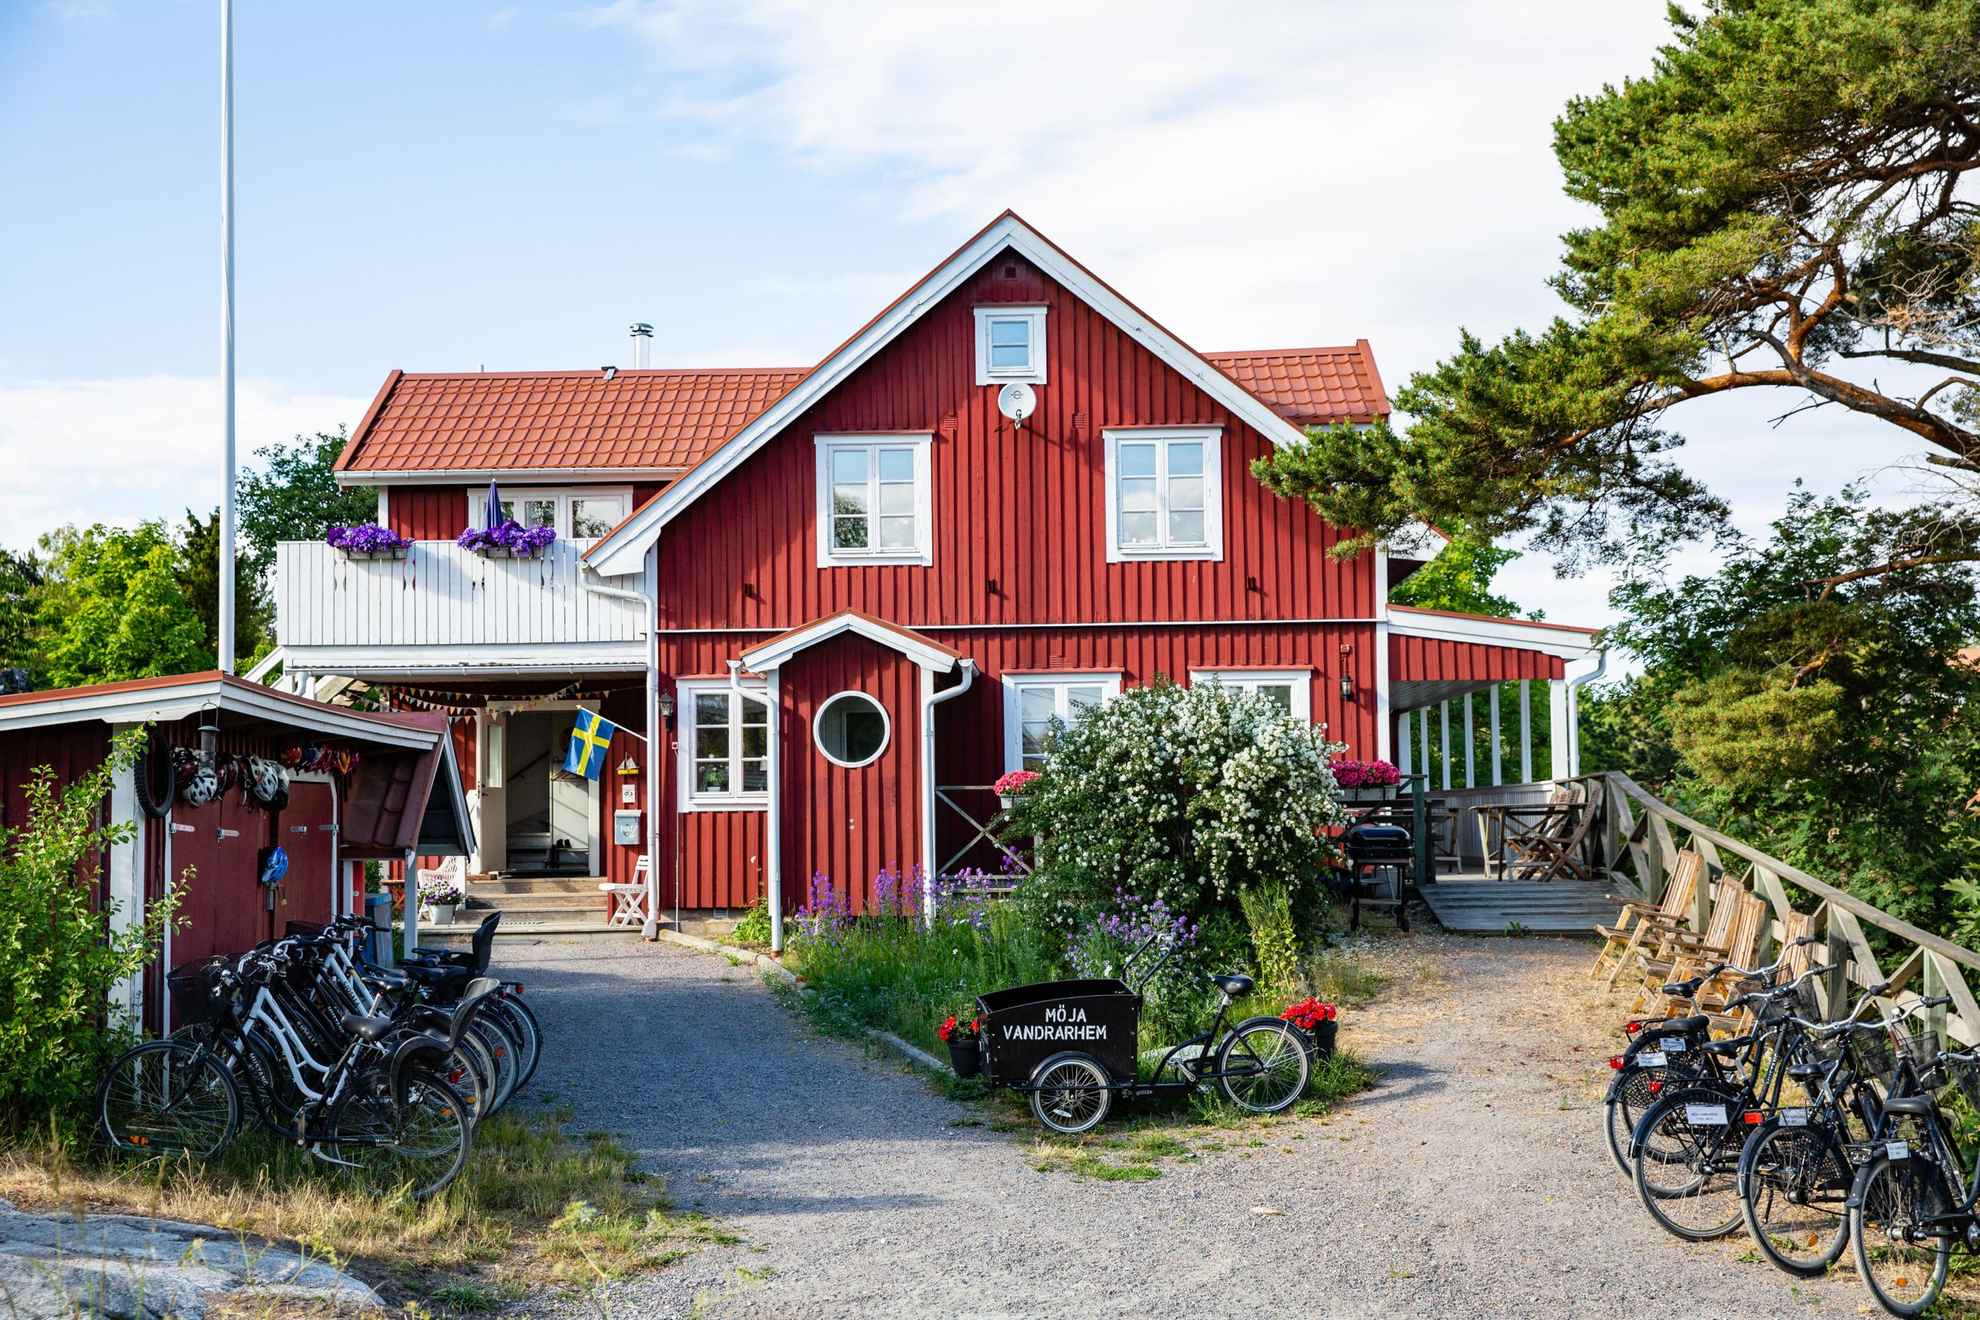 A red wooden house with white trims during summer. Outside the house is several bicycles. On one bike it says "Möja Vandrarhem".